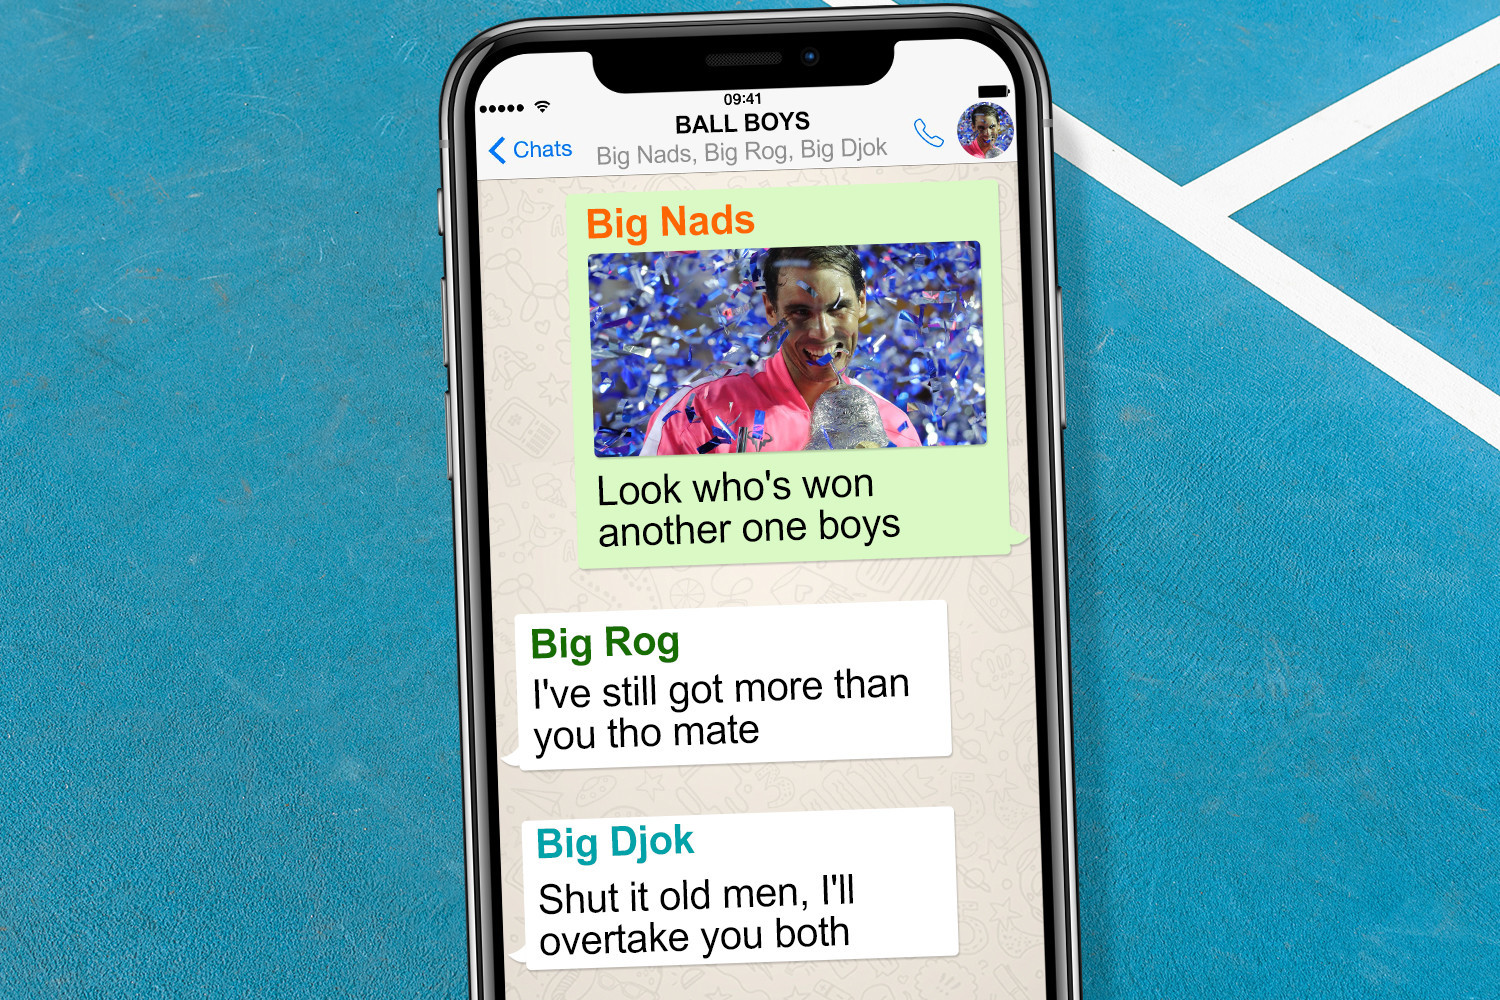 , Rafa Nadal reveals he has WhatsApp group with rivals Roger Federer and Novak Djokovic which three chat in